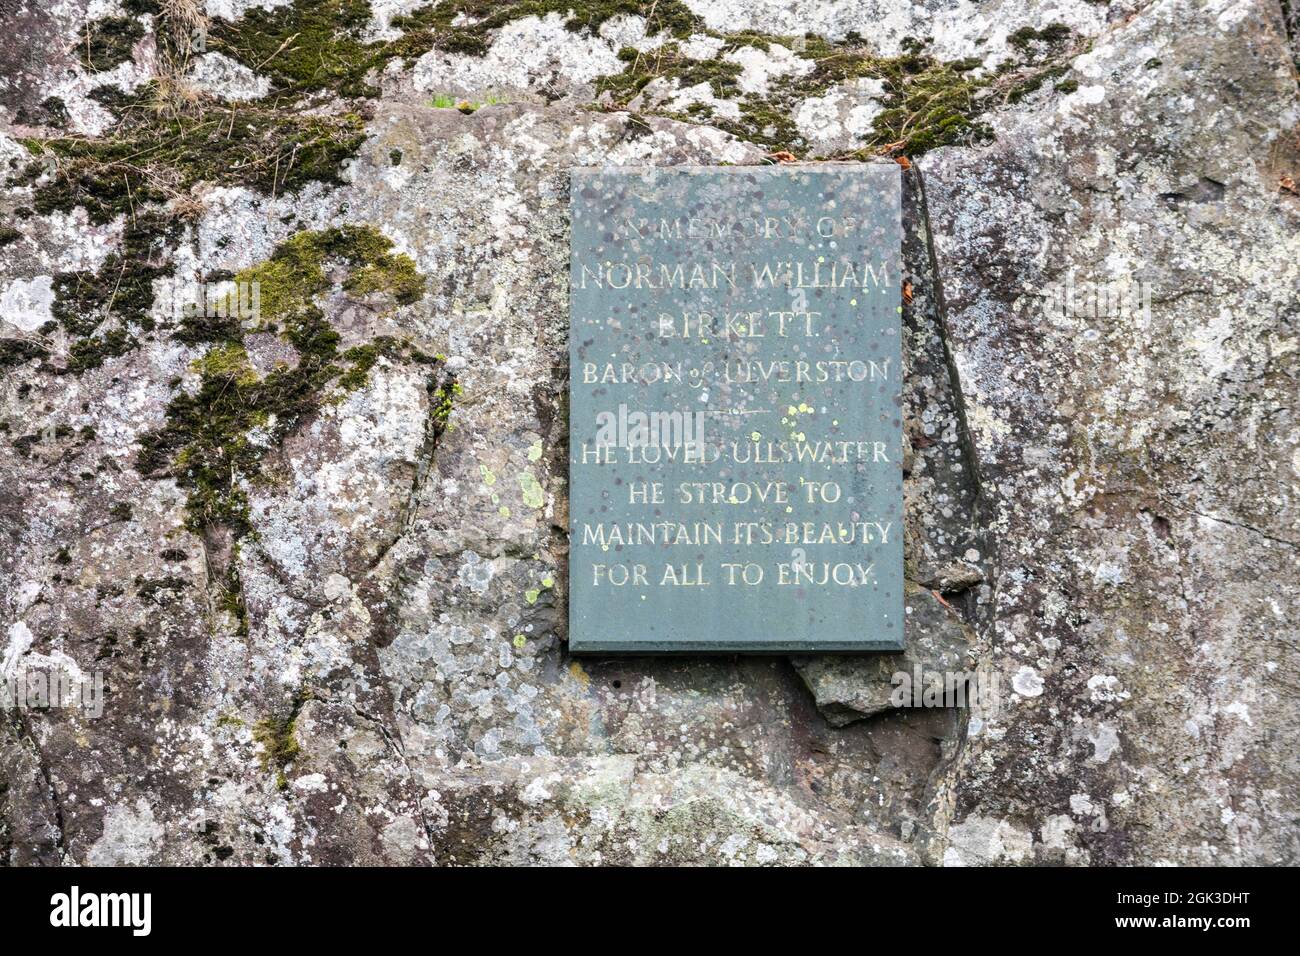 Plaque commemorating Norman William Birkett, near the Ullswater Way but only visible from the water, Ullswater, Lake District, UK Stock Photo